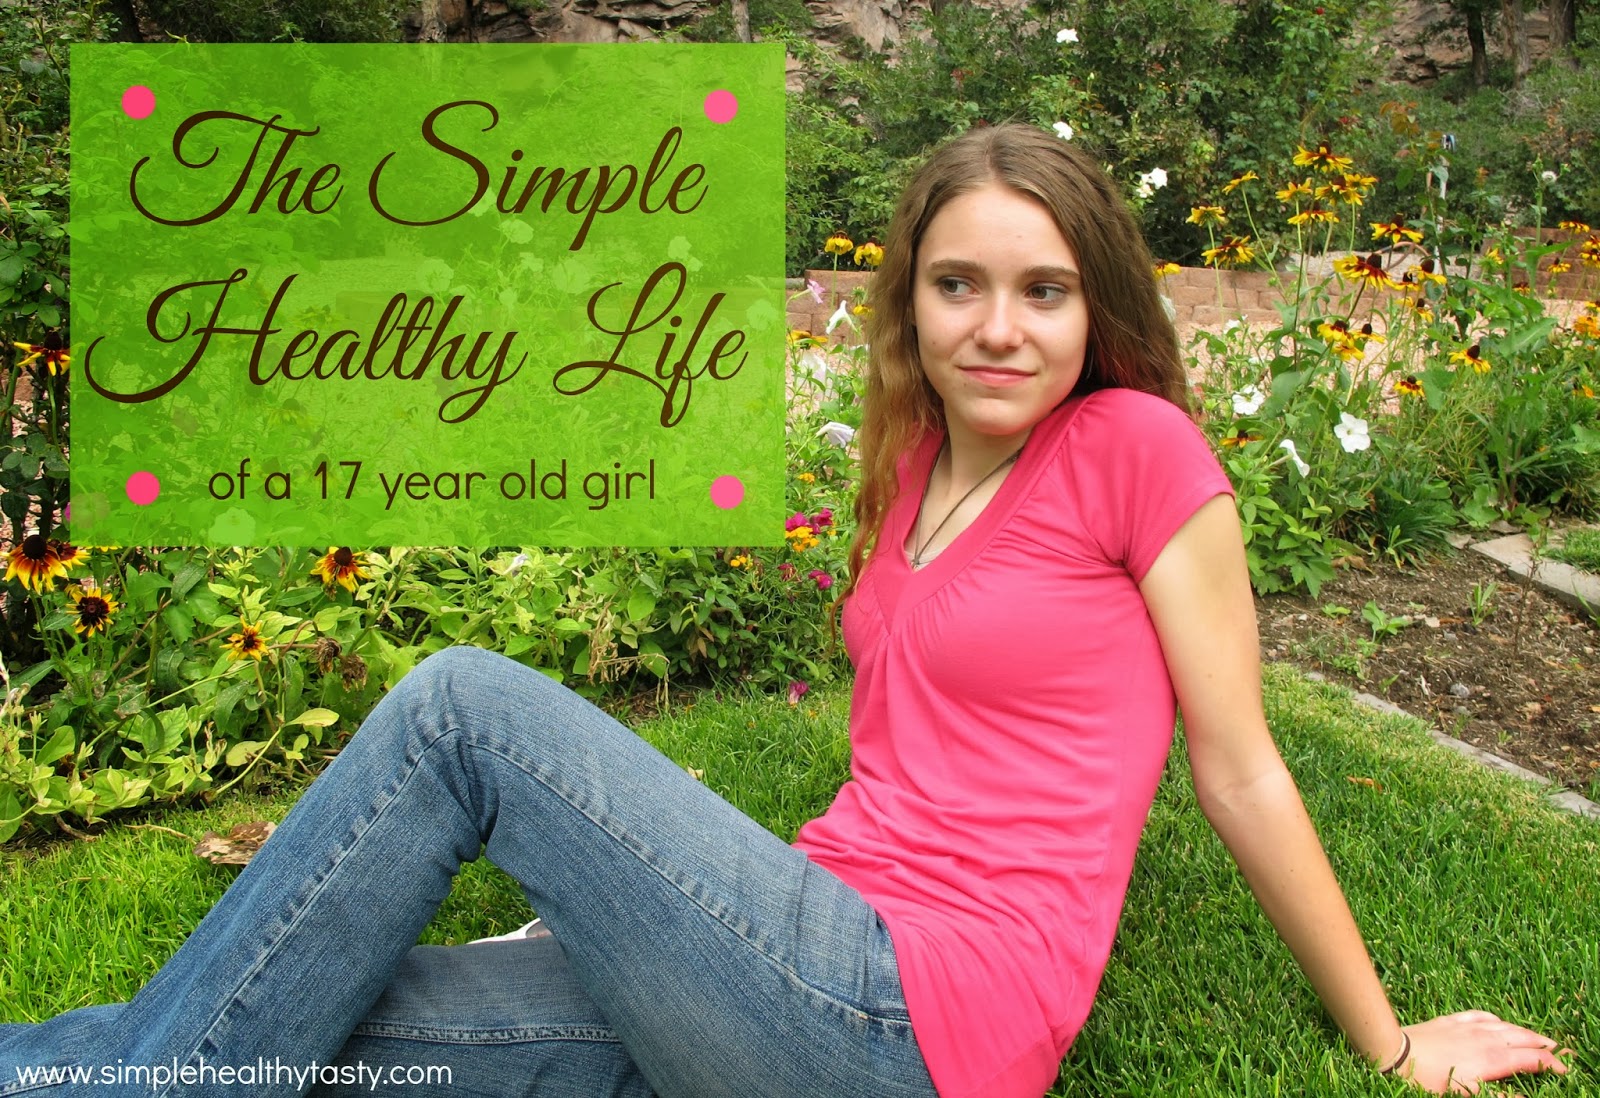 My Simple Healthy Life at 17